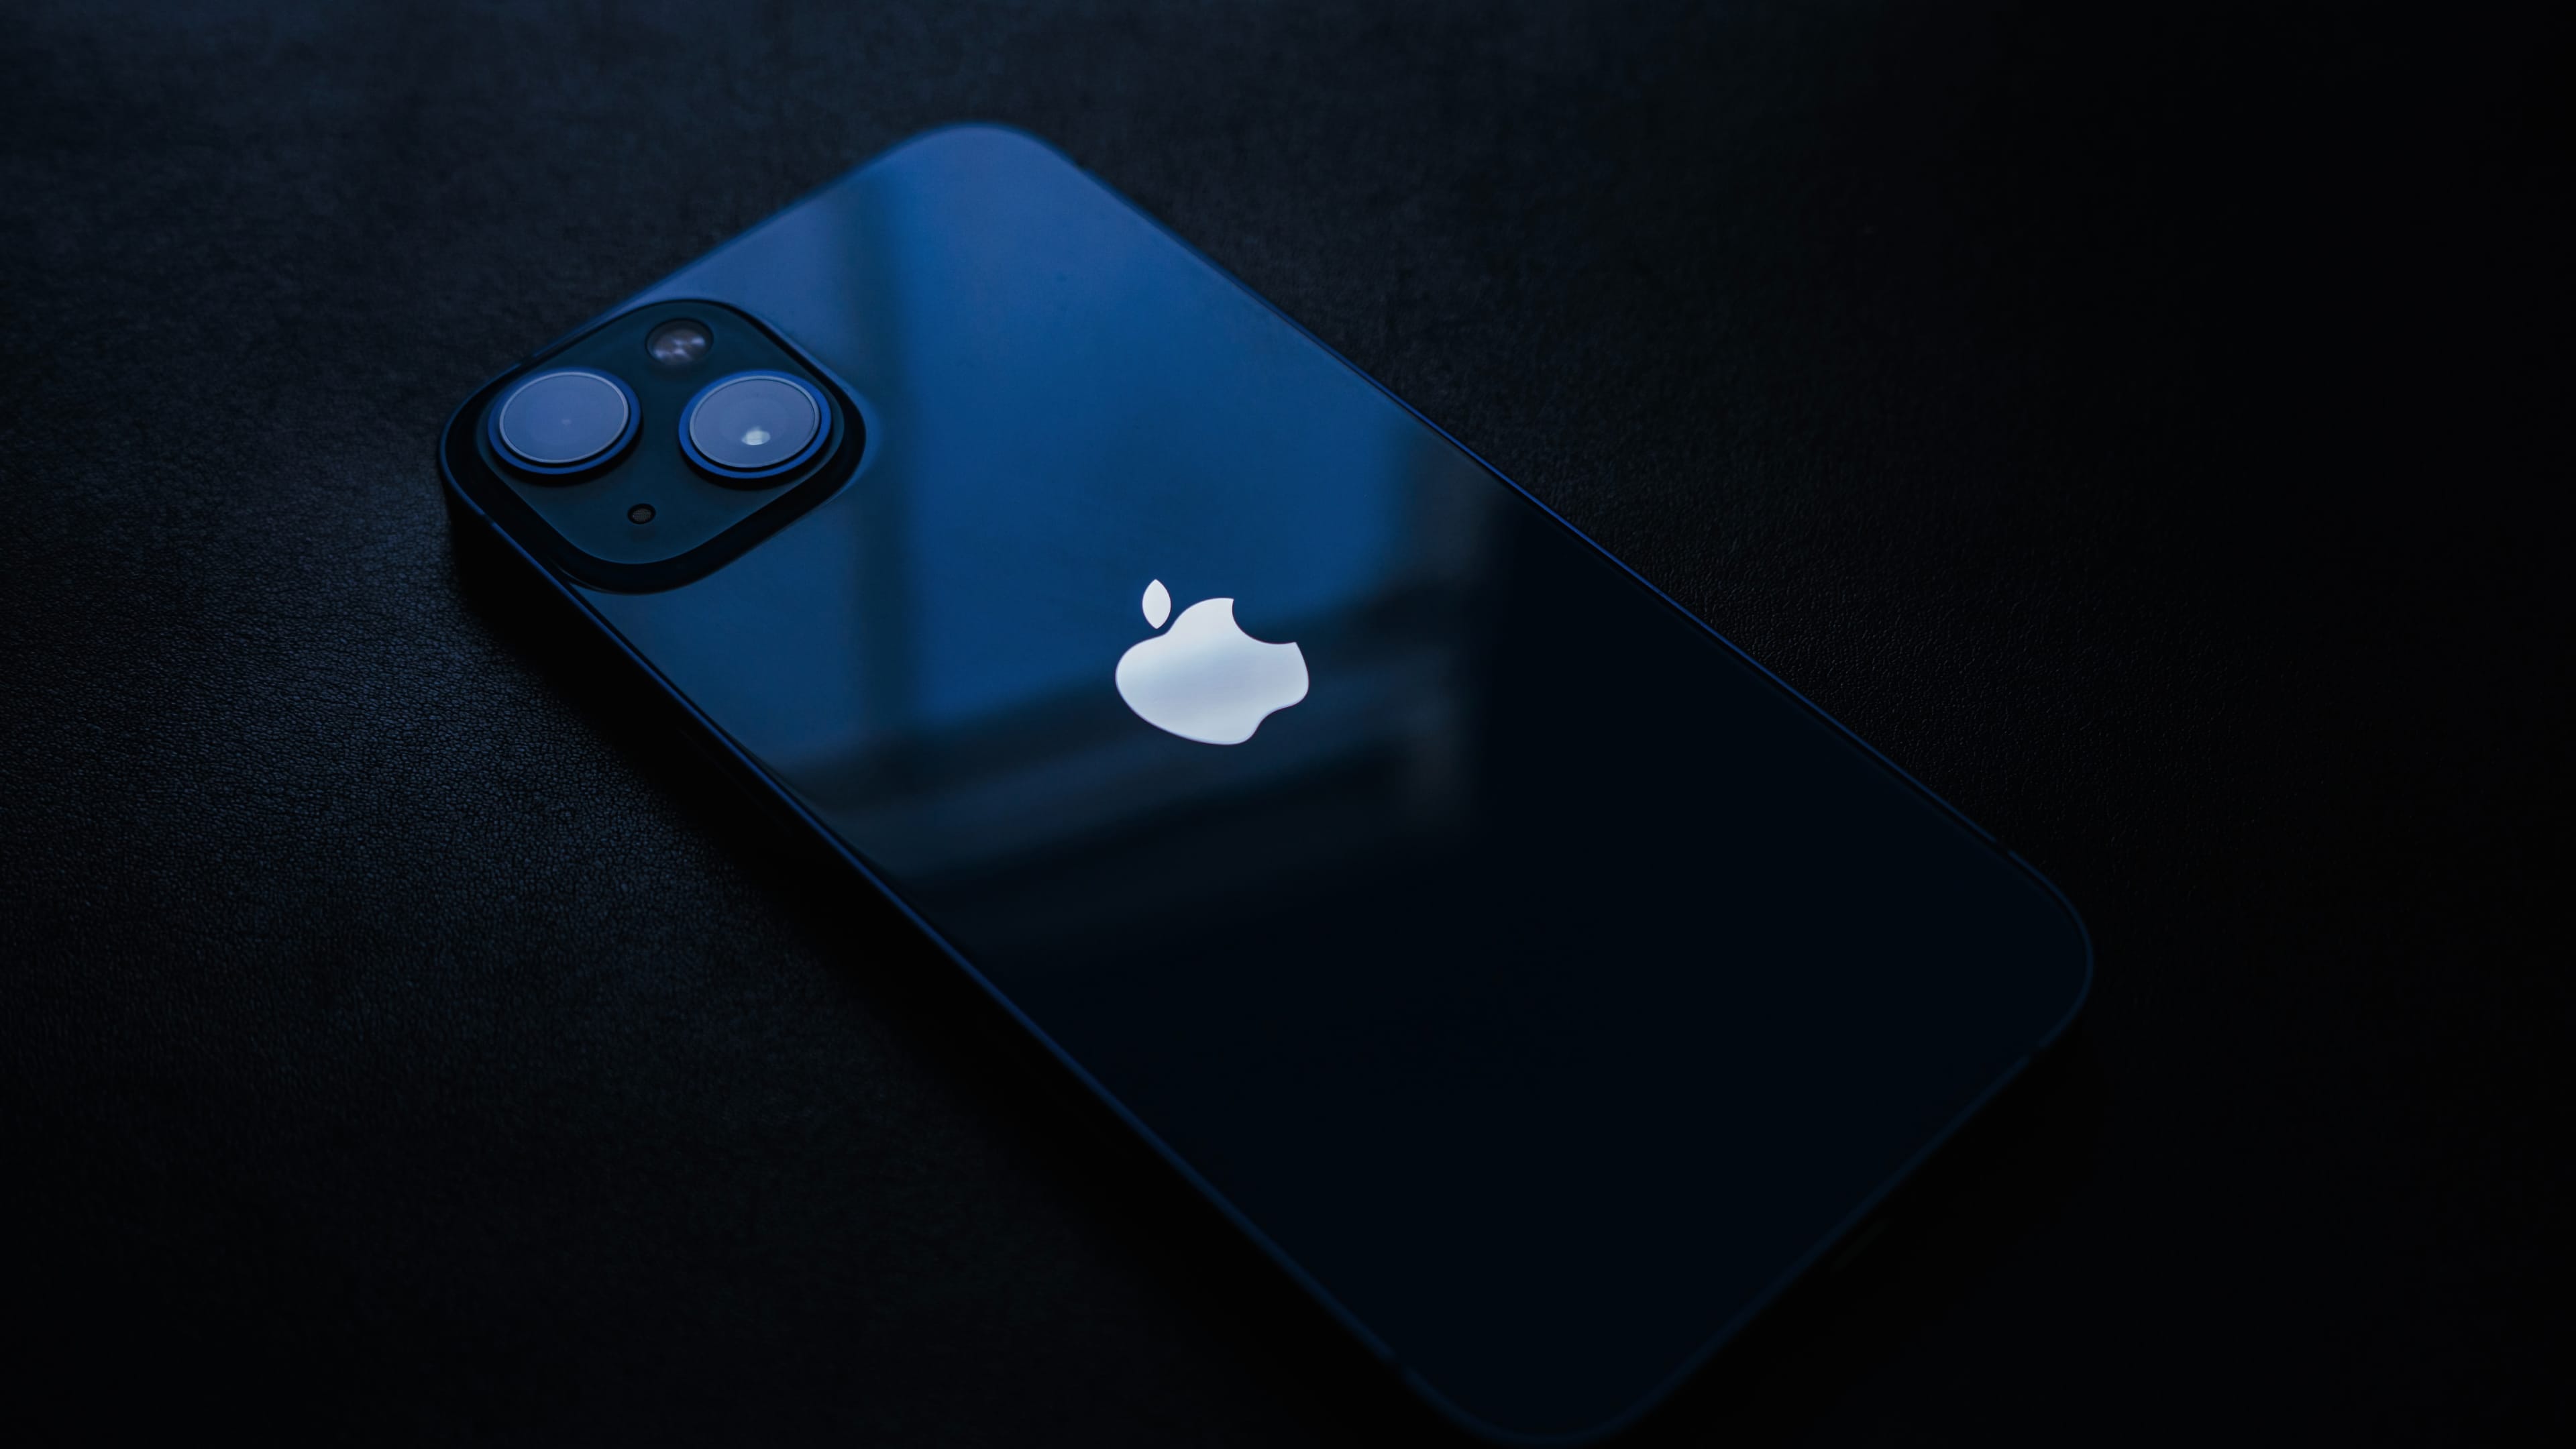 Blue iPhone 13 set facedown on a laptop sleeve on the bed